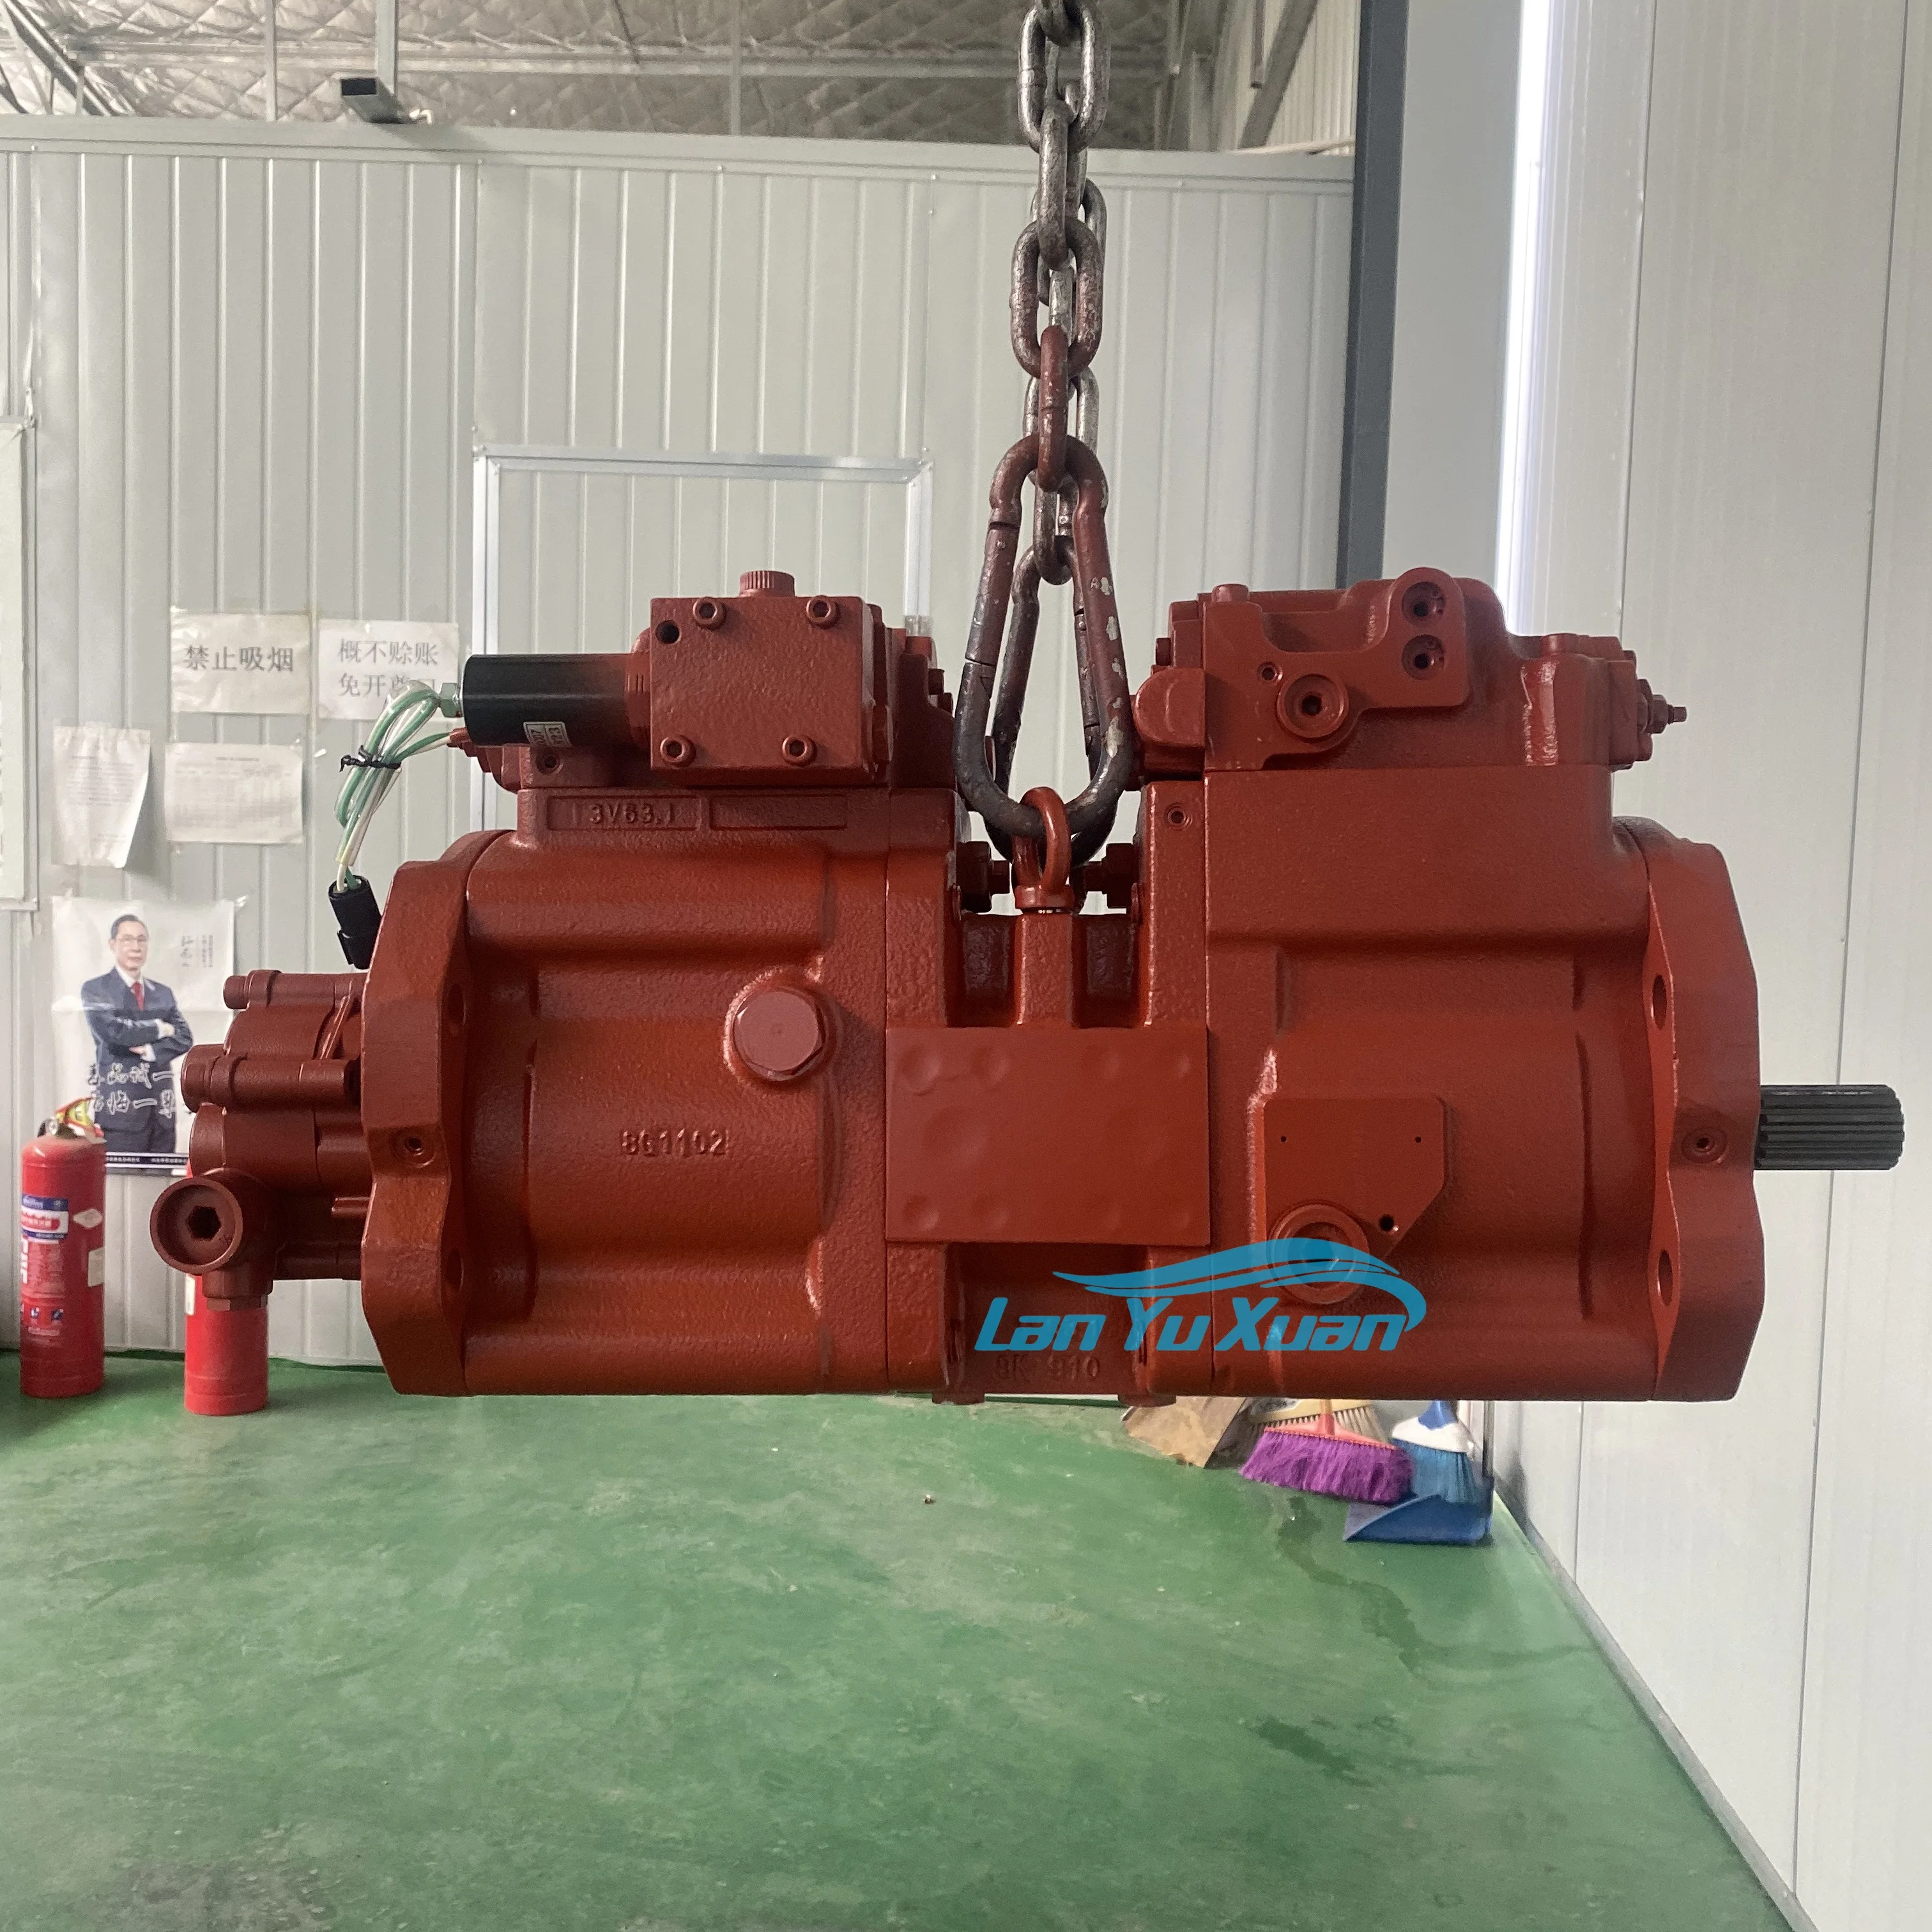 K3V63DT-9N hydraulic piston pump 400914-00357 for the excavator DX120 DX140 trade assurance na chi pvd pvd 00b pvd 0b pvd 1b pvd 2b pvd 3b series pvd 0b 24p 8g3 4837b hydraulic piston pump for excavator